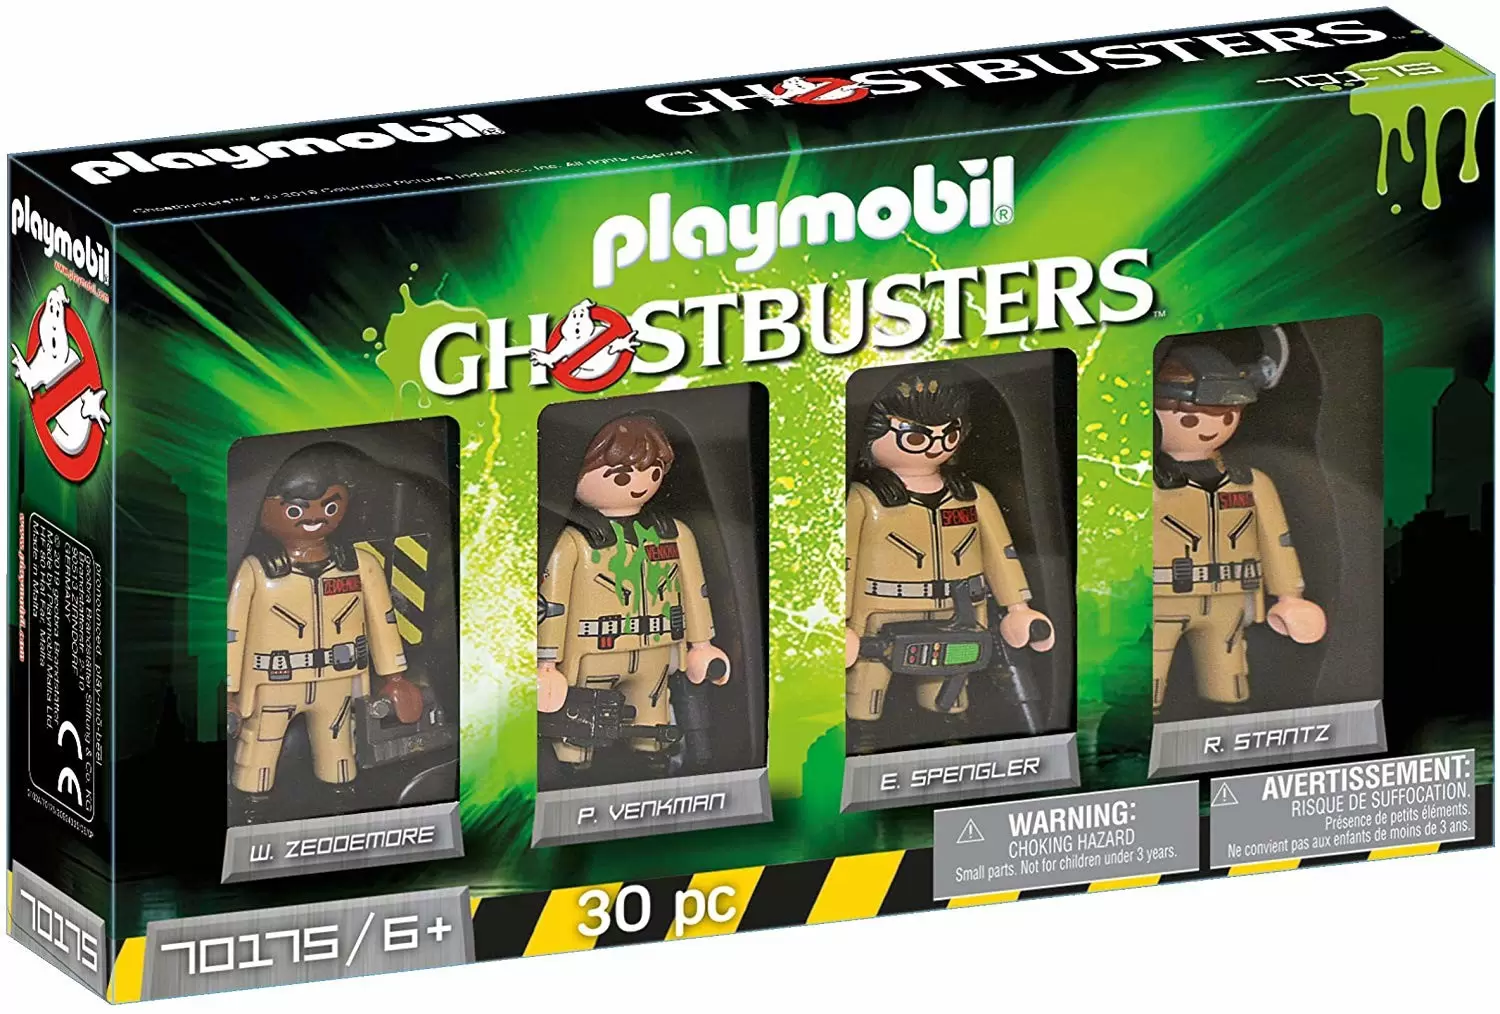 Playmobil Ghosbusters - Ghostbusters Collector Edition 4-Pack